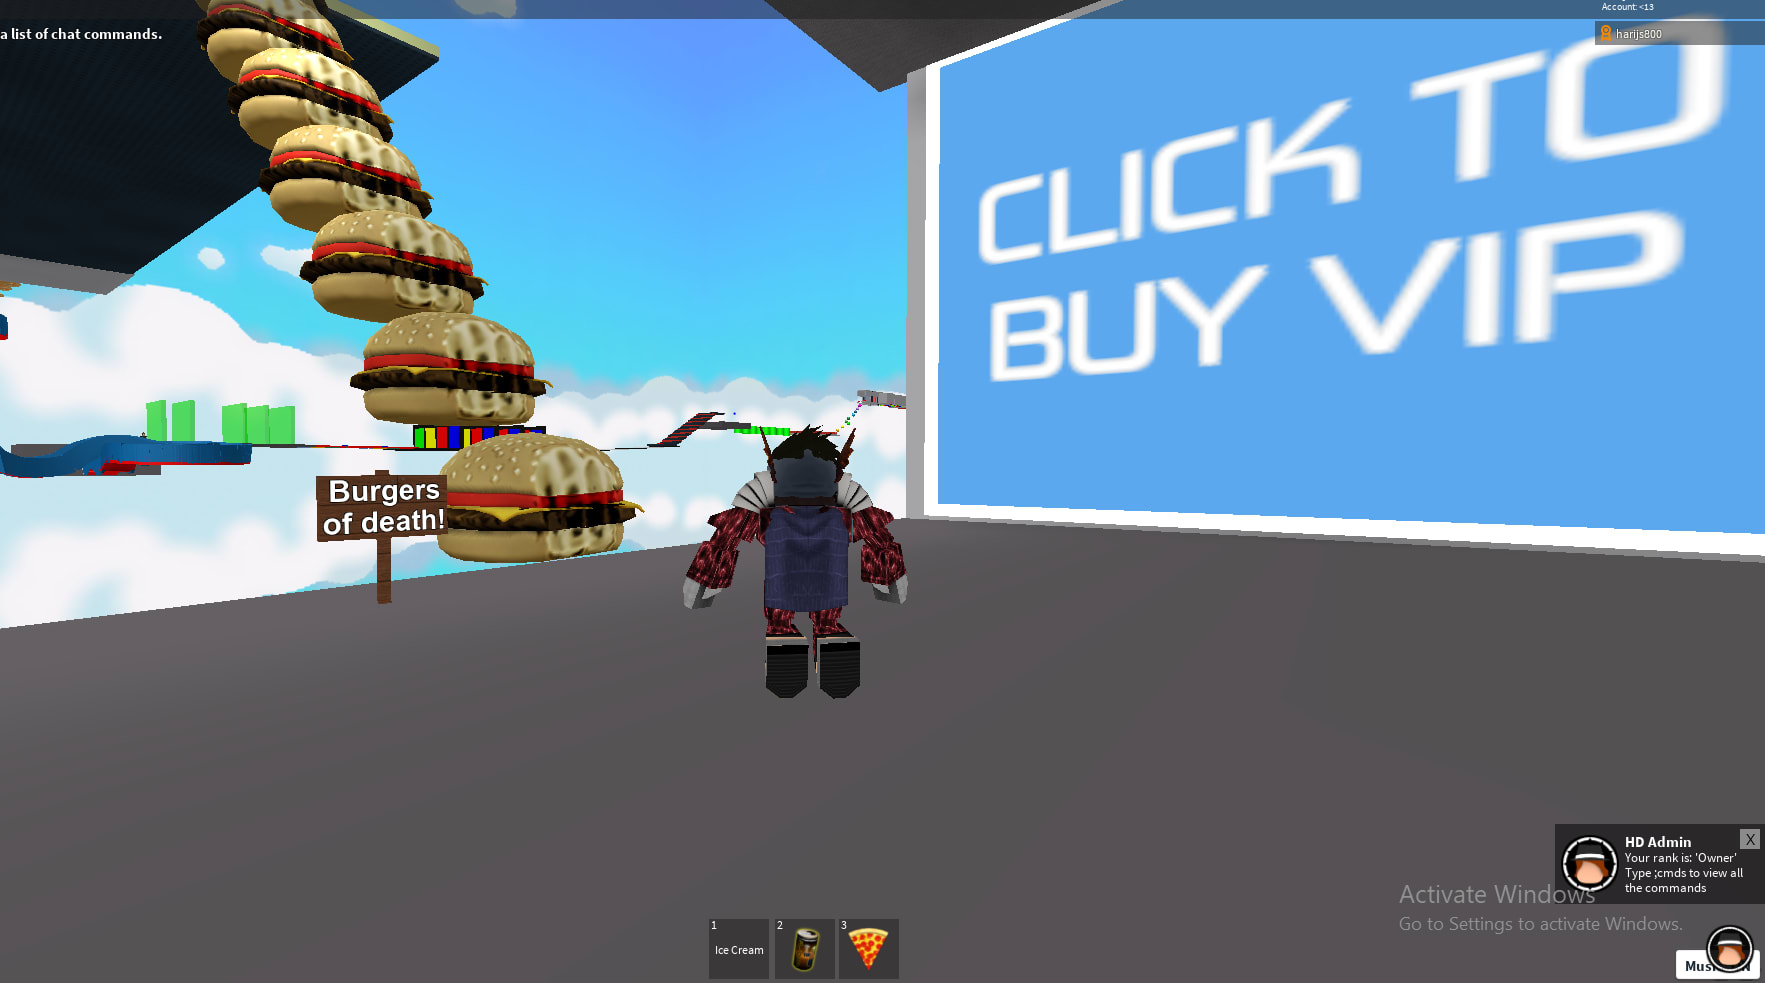 Make A Roblox Obby By Harijsbermaks - roblox create how to edit a obby